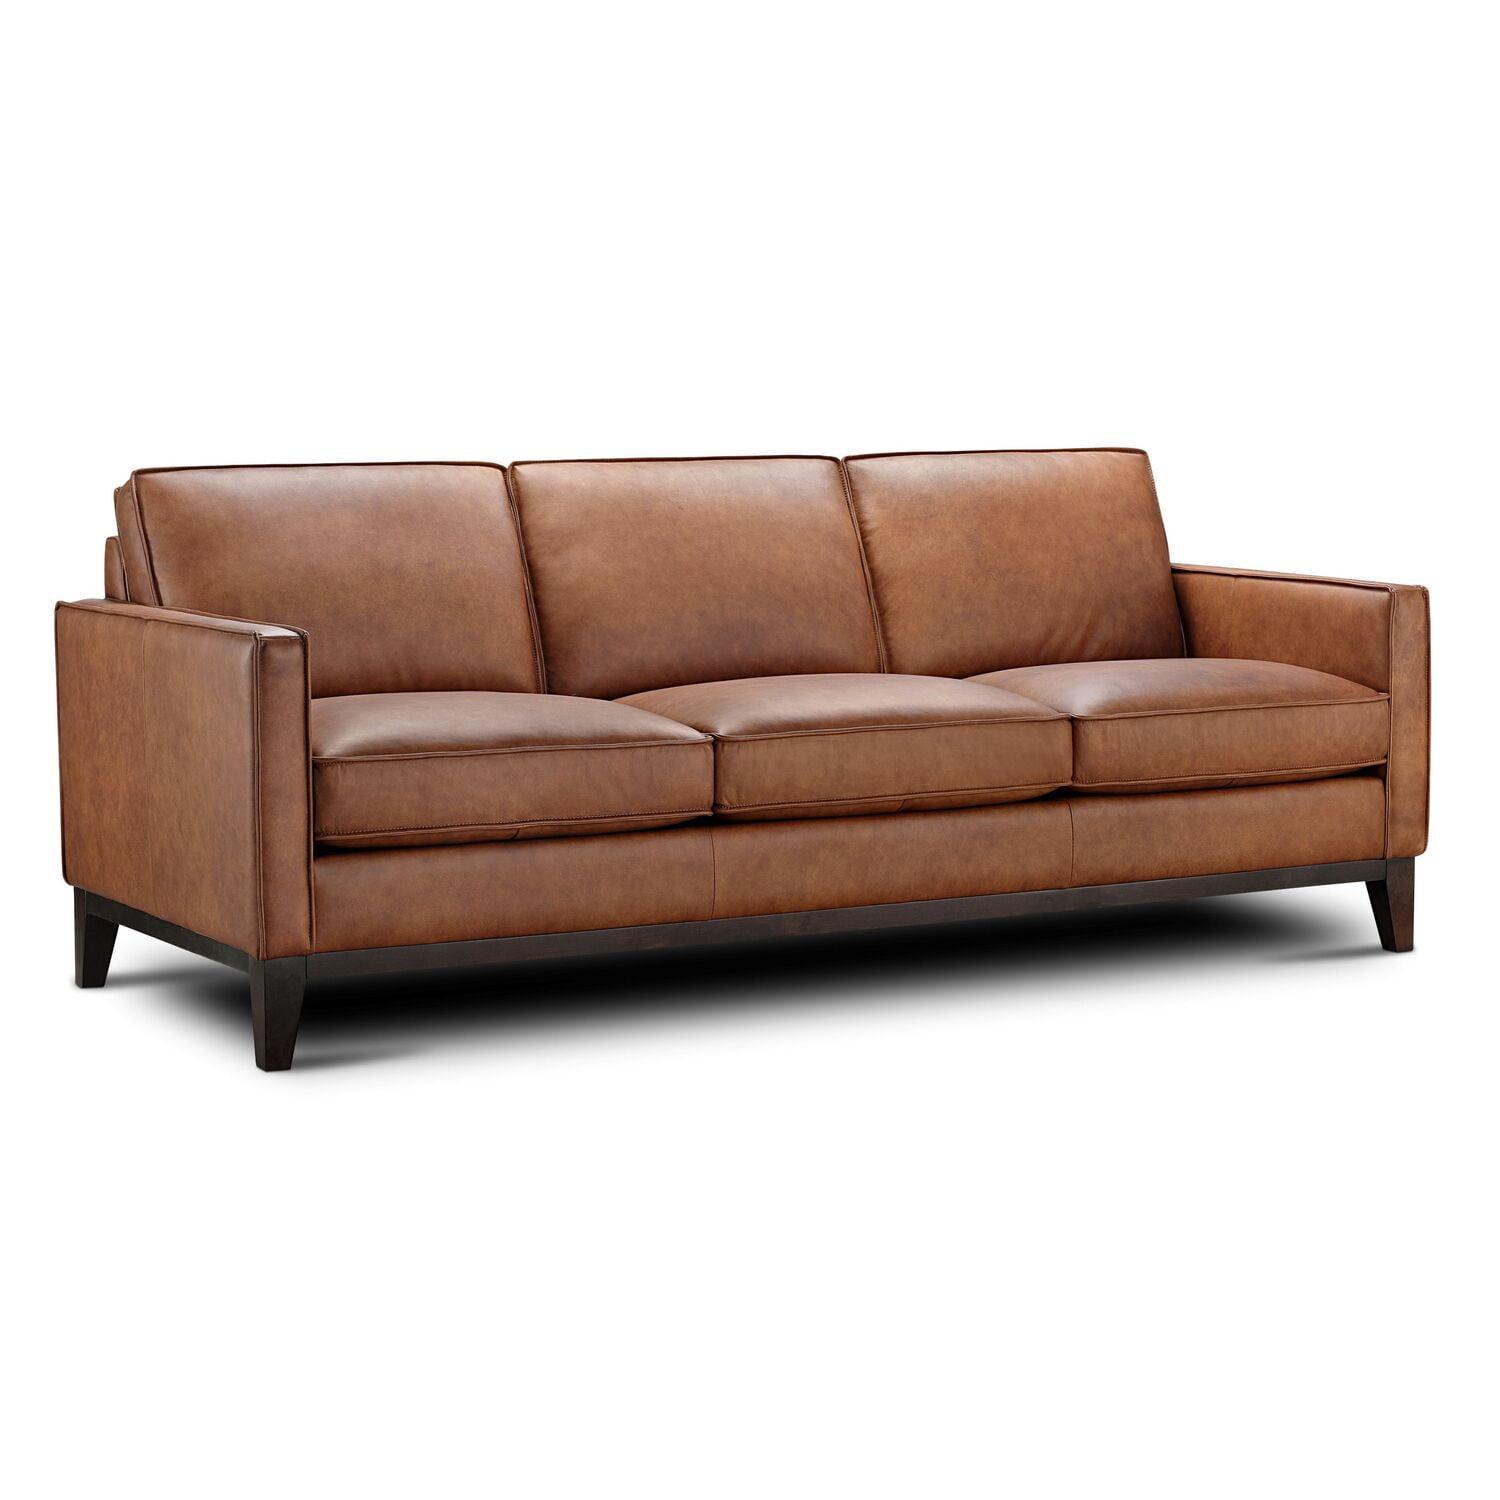 Pimlico 86" Brown Top Grain Leather Sofa with Wood Accents